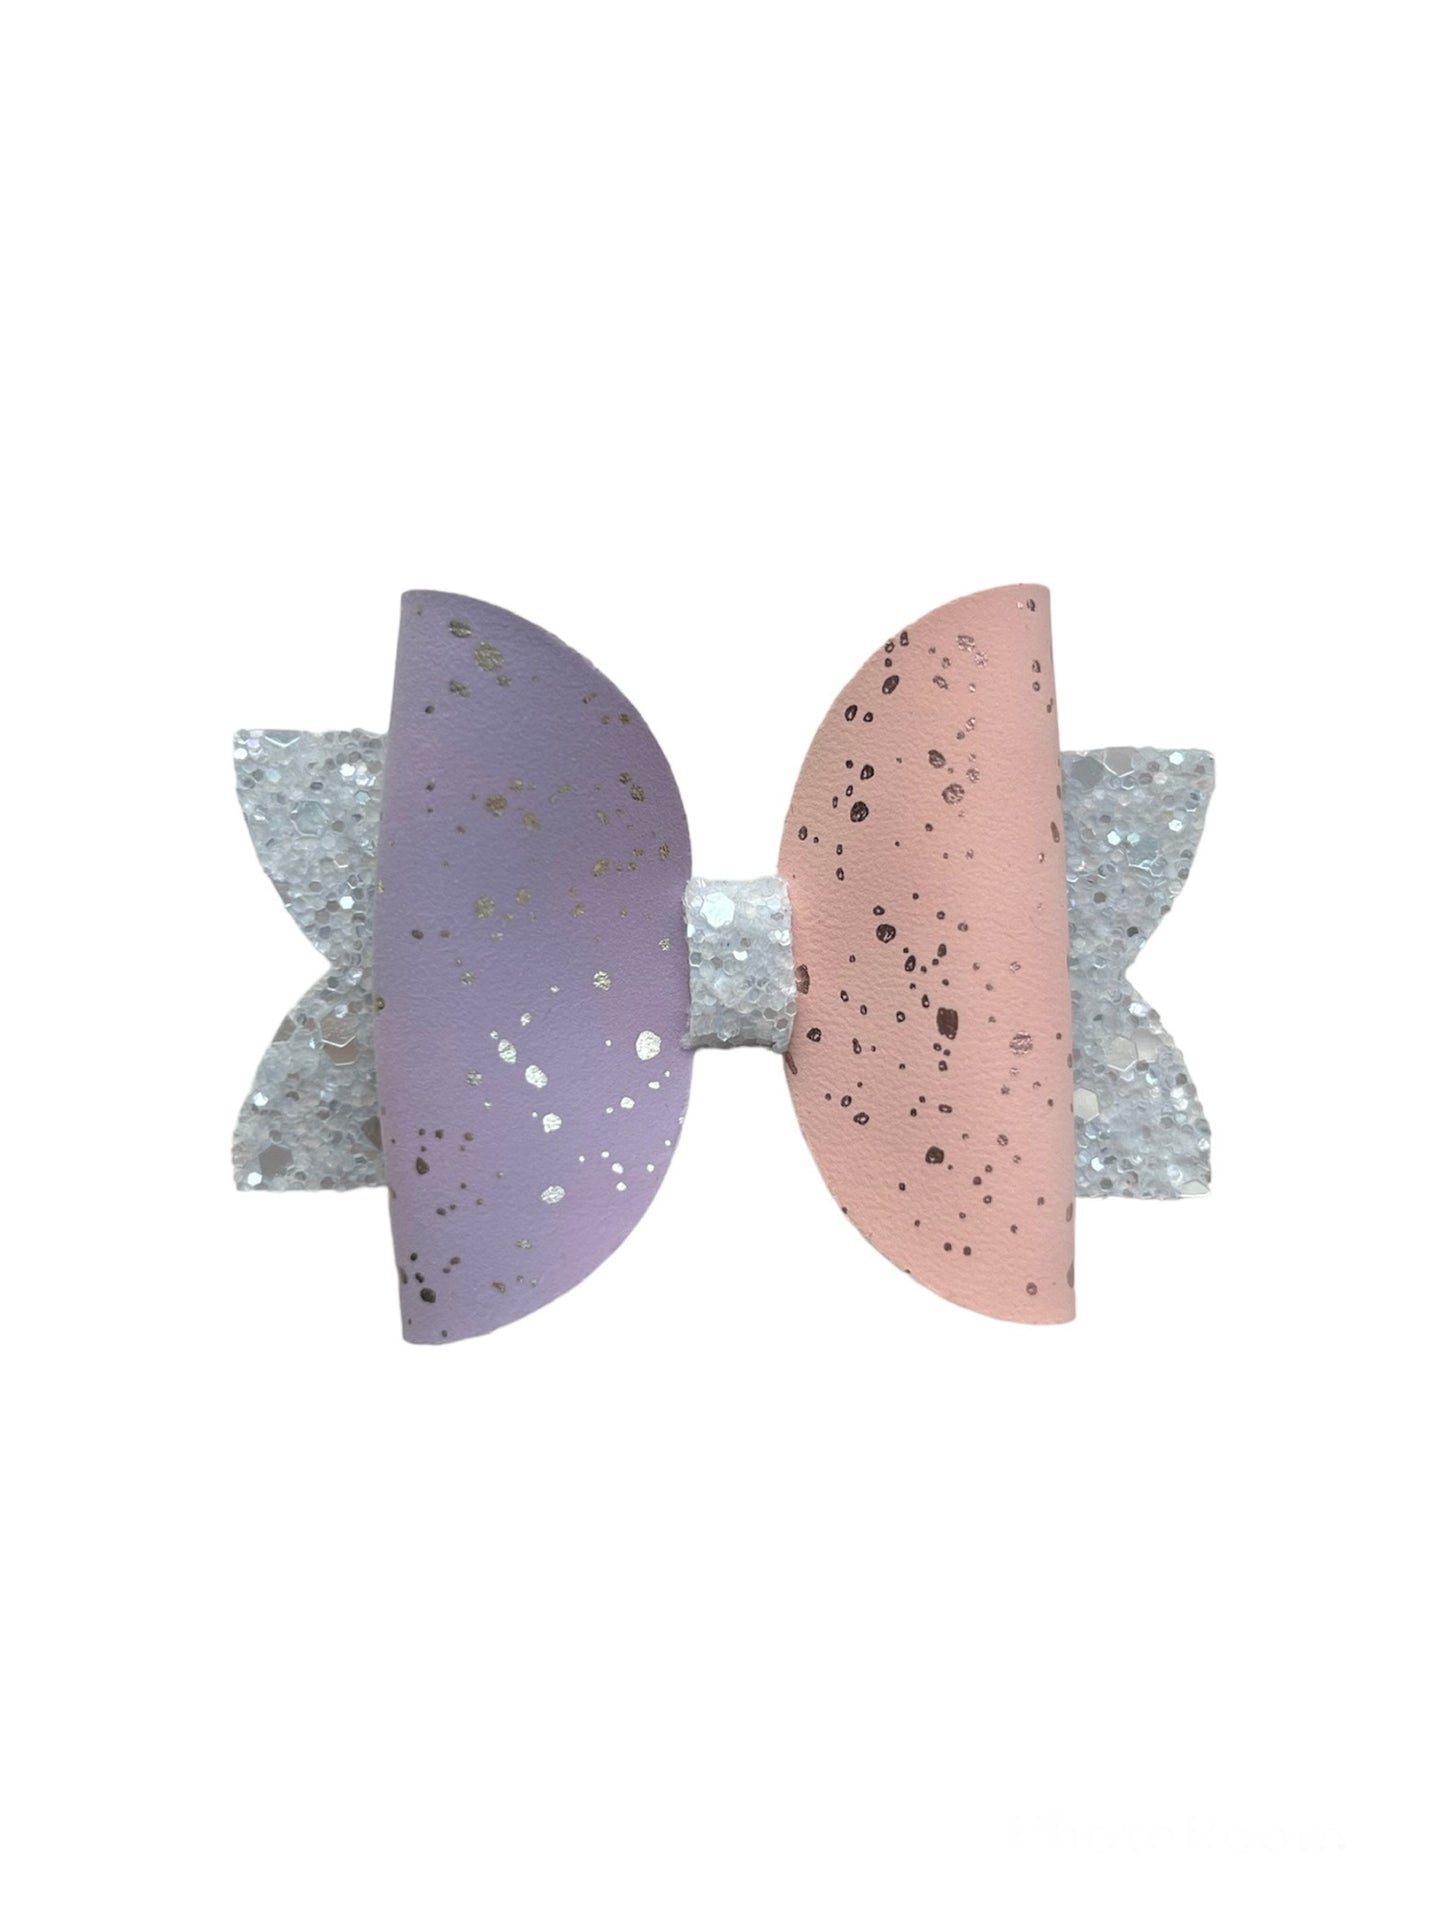 Magical Easter Bow!